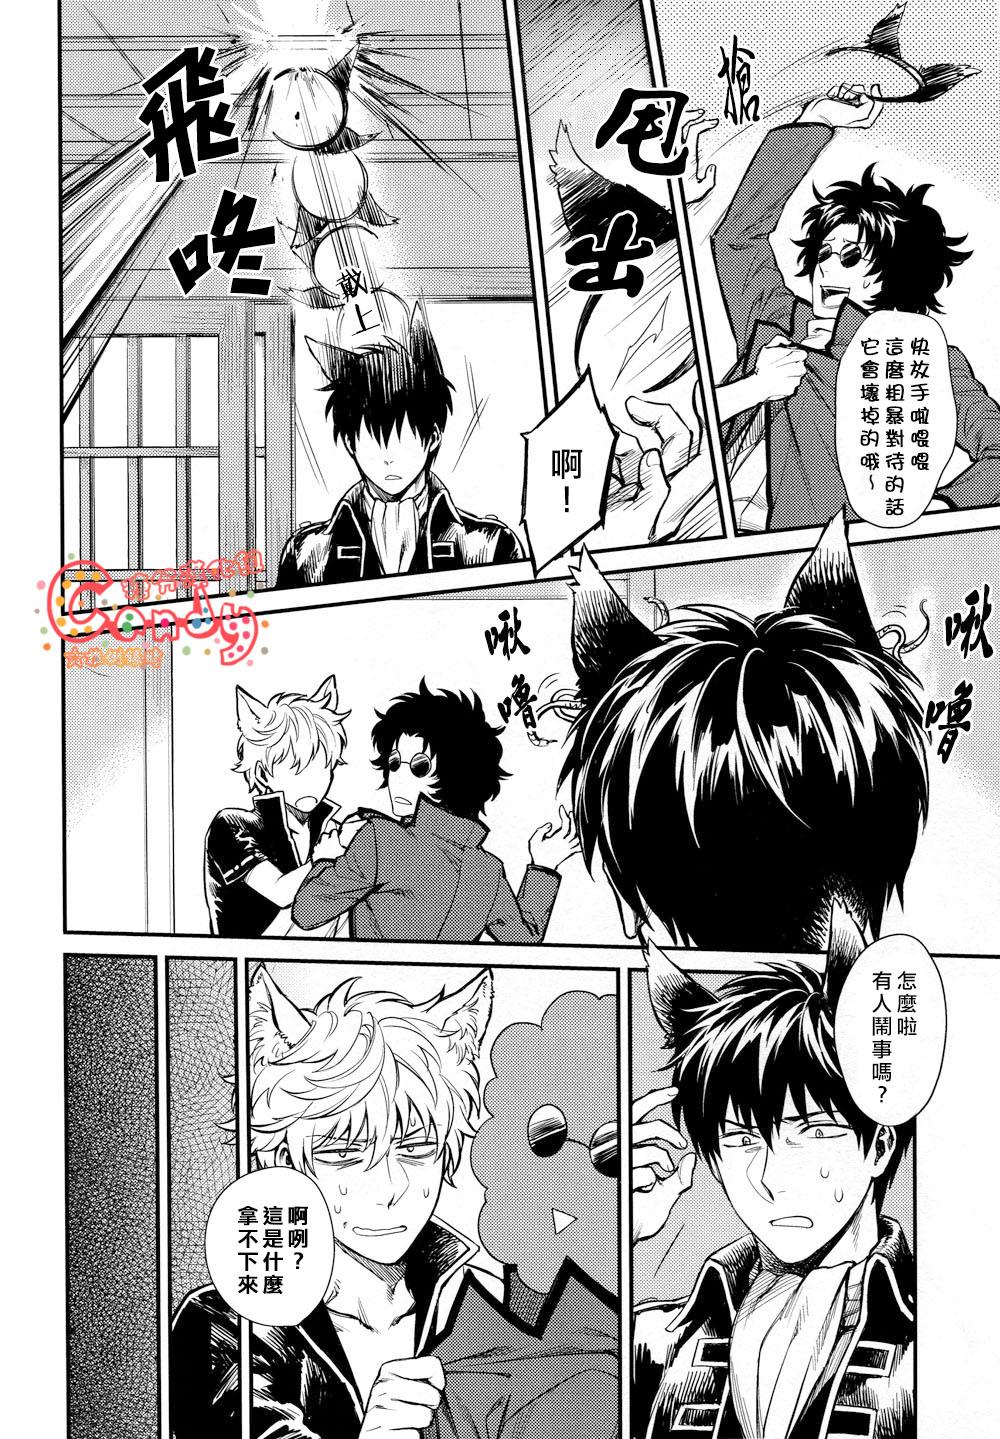 Cunt Like cat and dog - Gintama Blow - Page 9